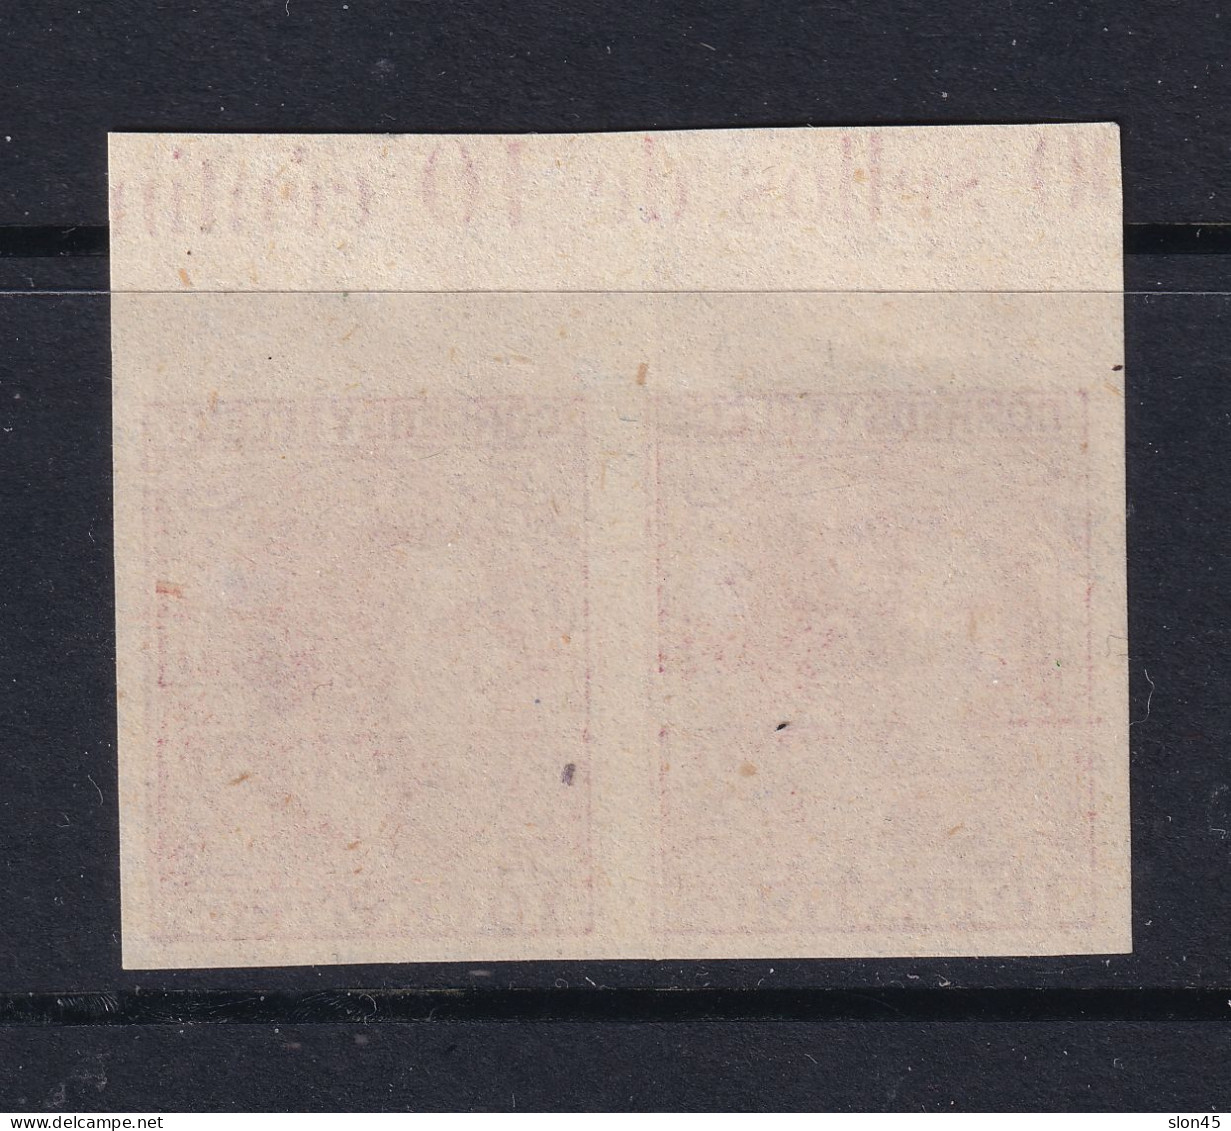 Spain 1879 1c Double Print  One Inverted Imperf MNG 16028 - Oddities On Stamps